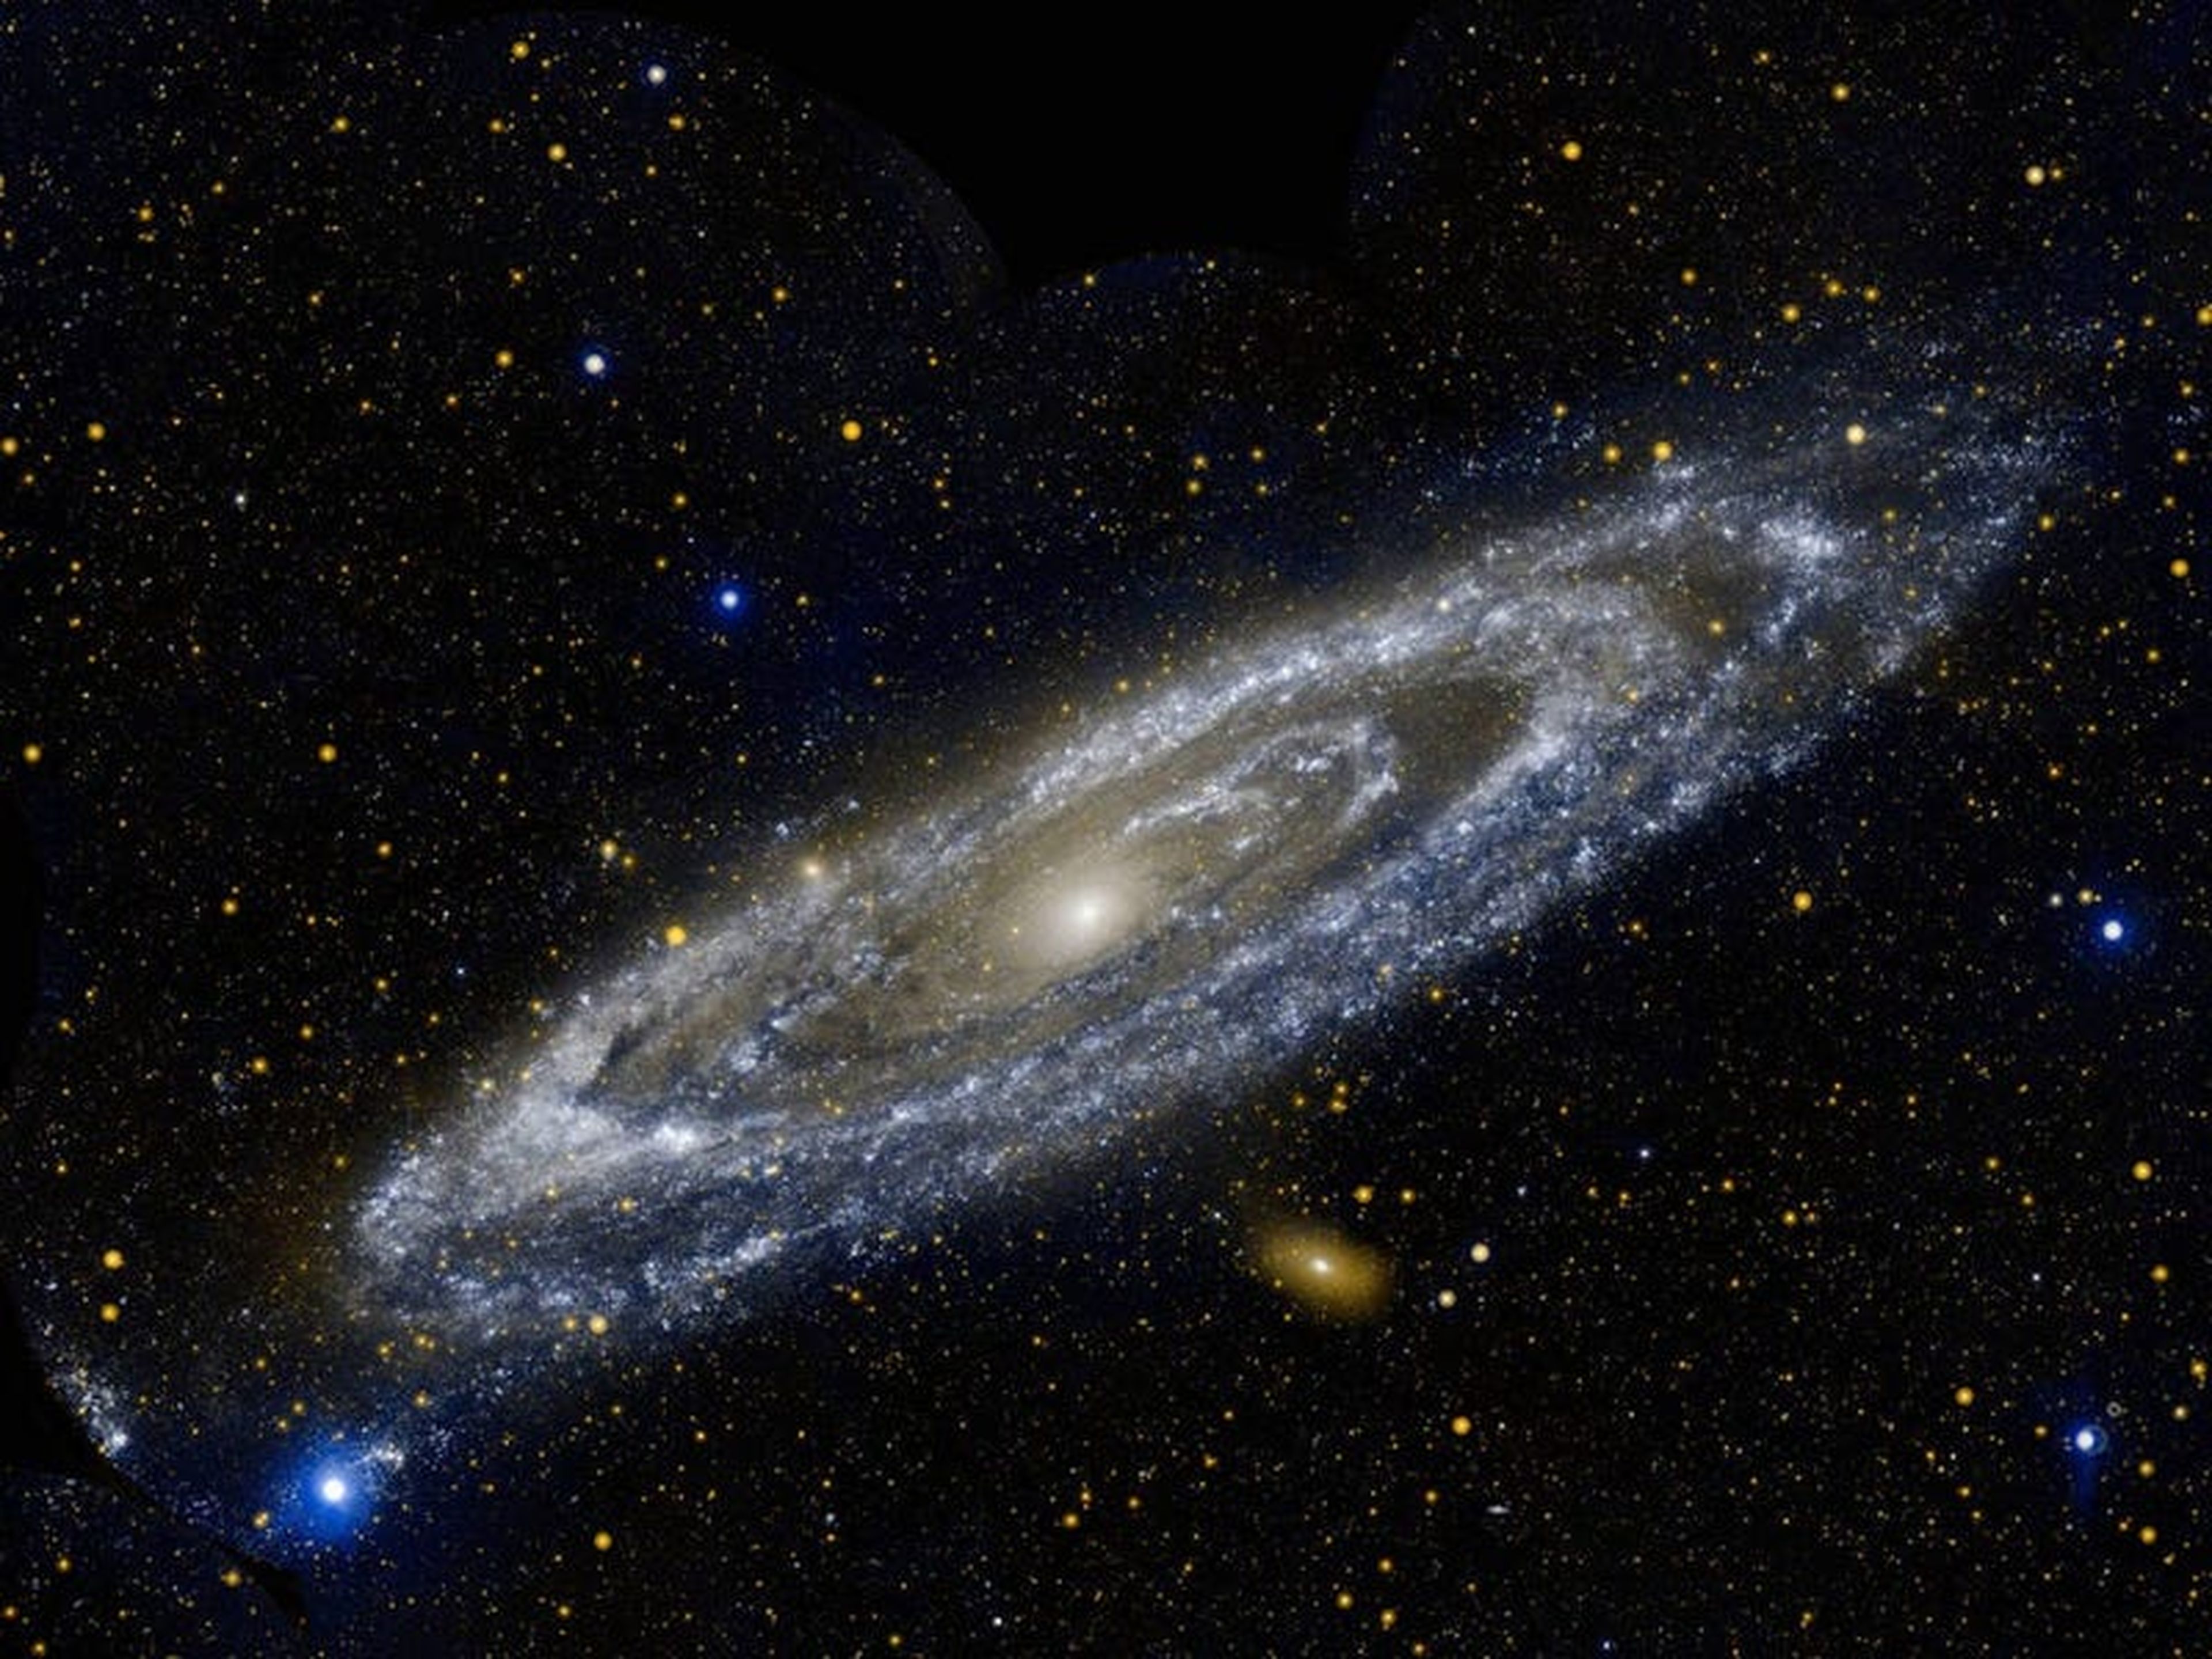 Spiral galaxies like the Milky Way and the Andromeda galaxy (pictured) have flat disks that contain most of their stars.